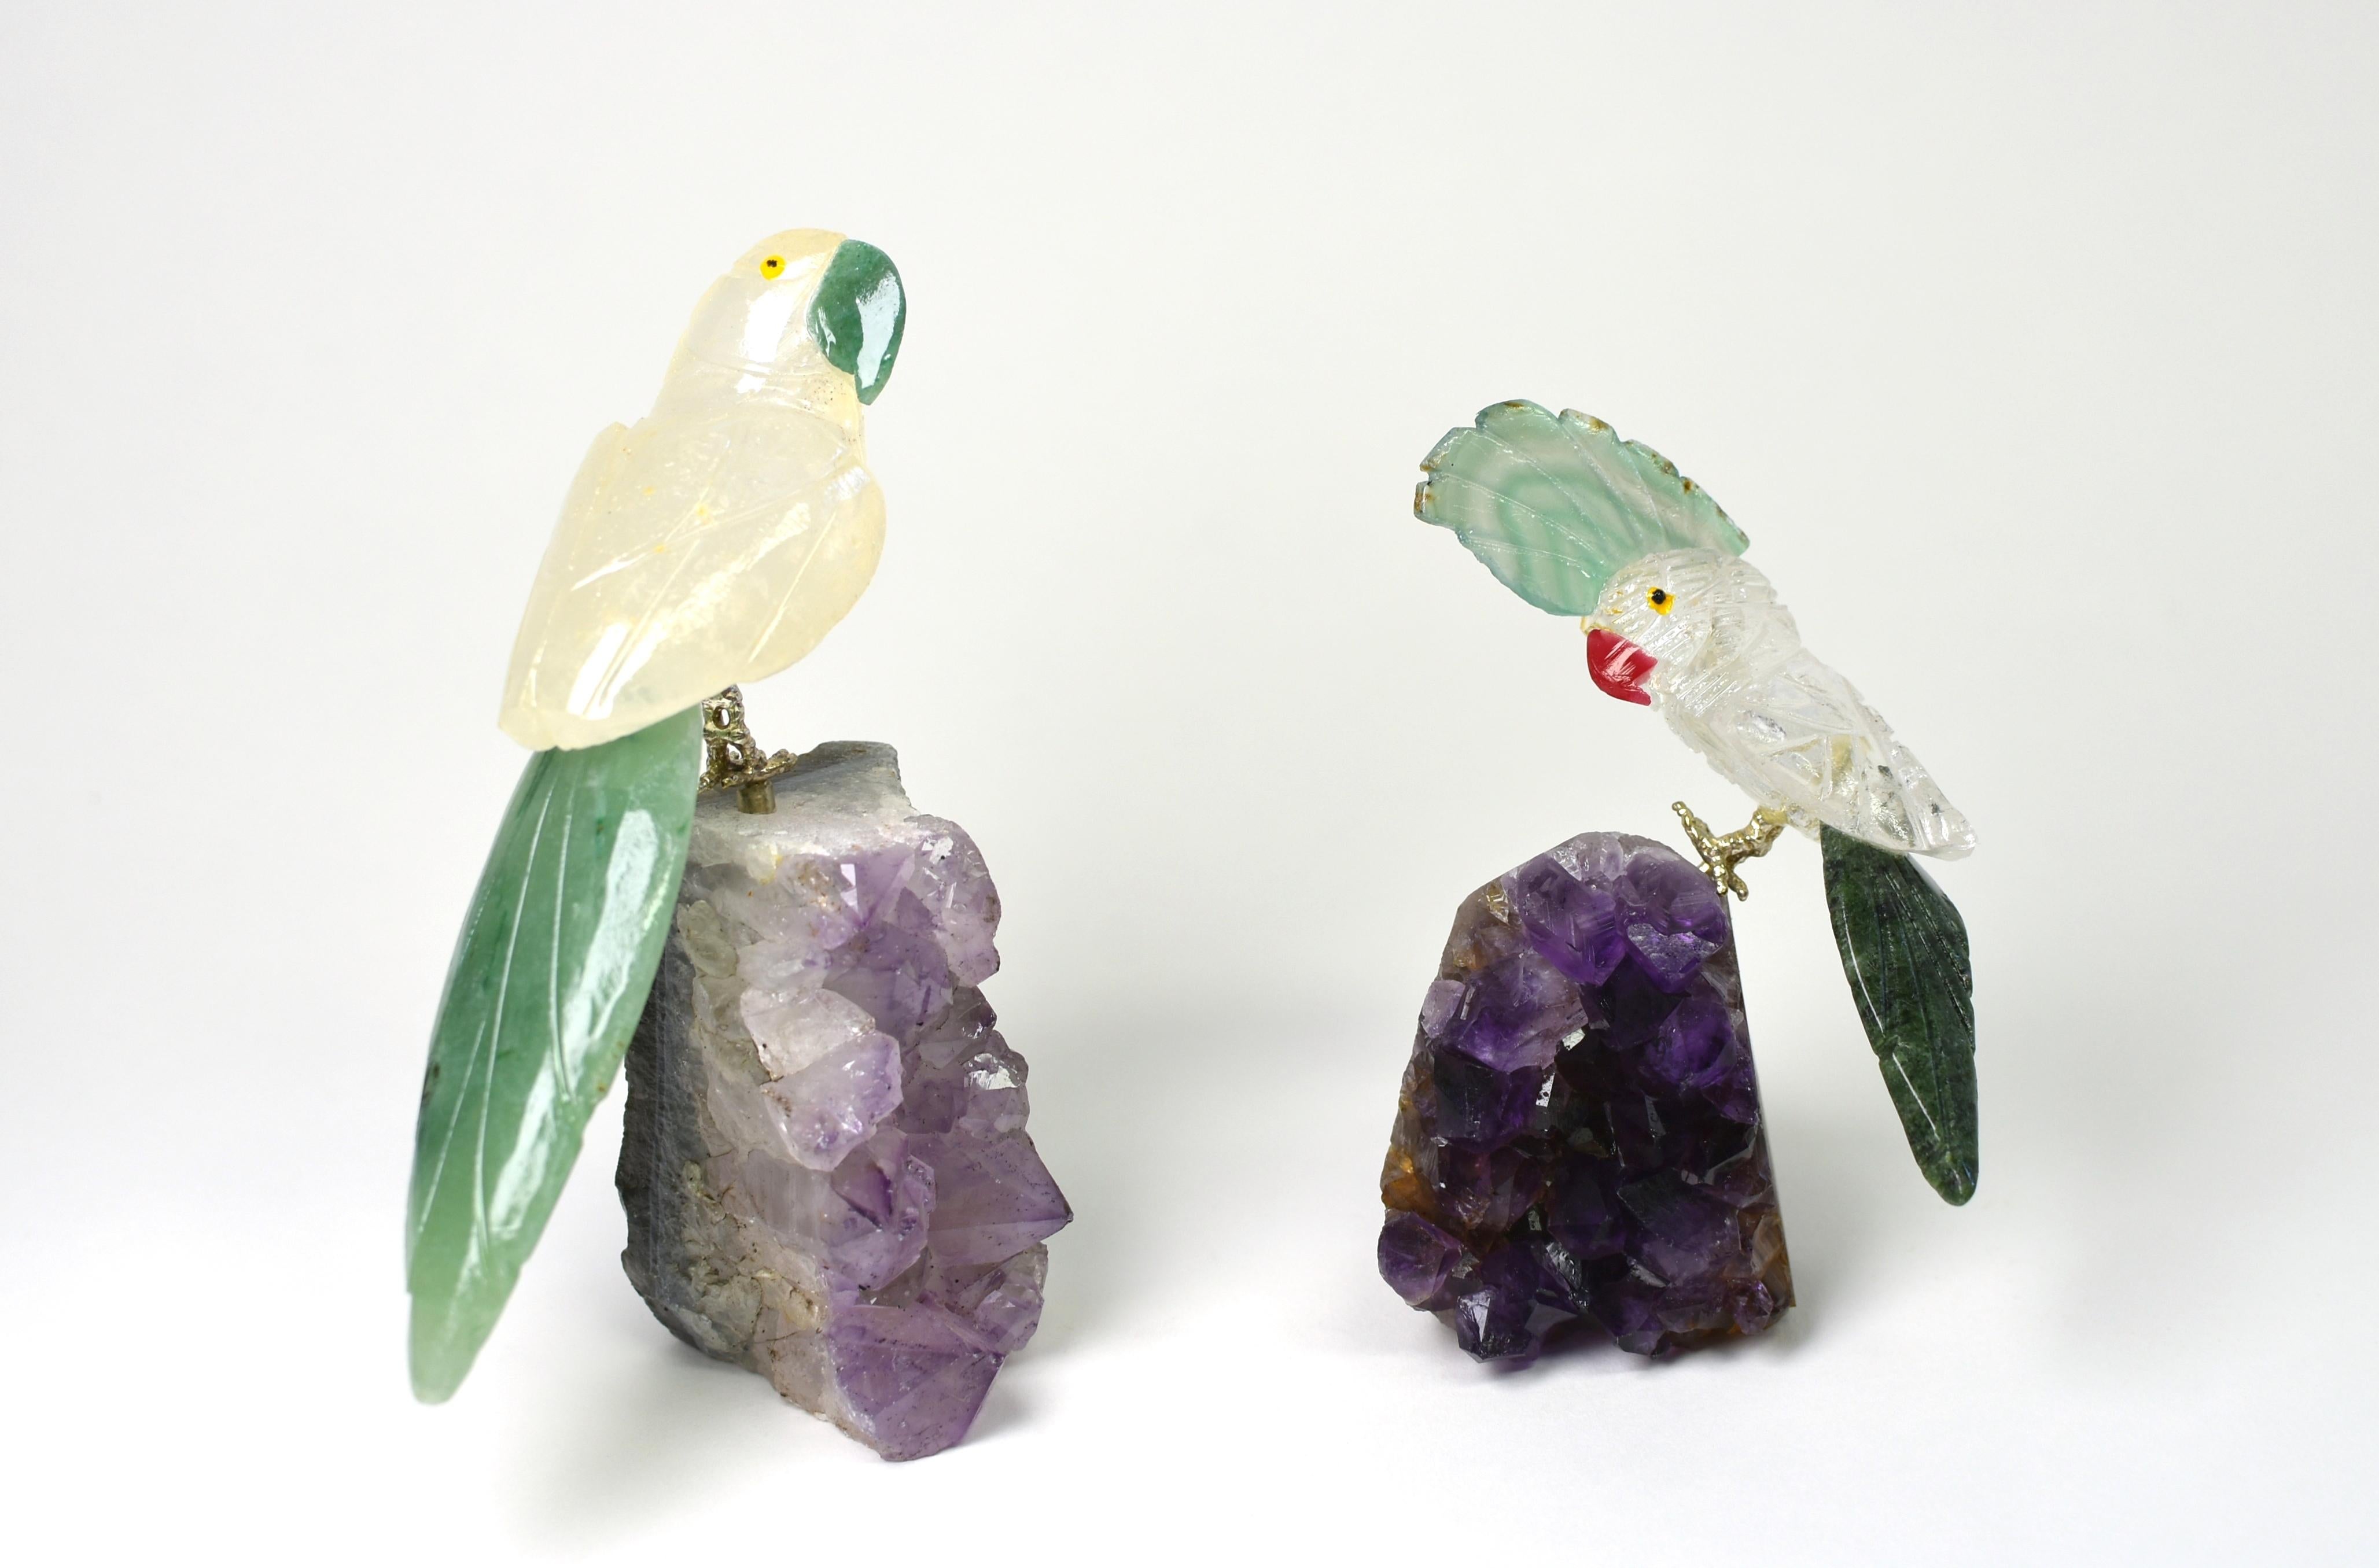 Contemporary Rock Crystal Parrots Birds on Amethyst For Sale